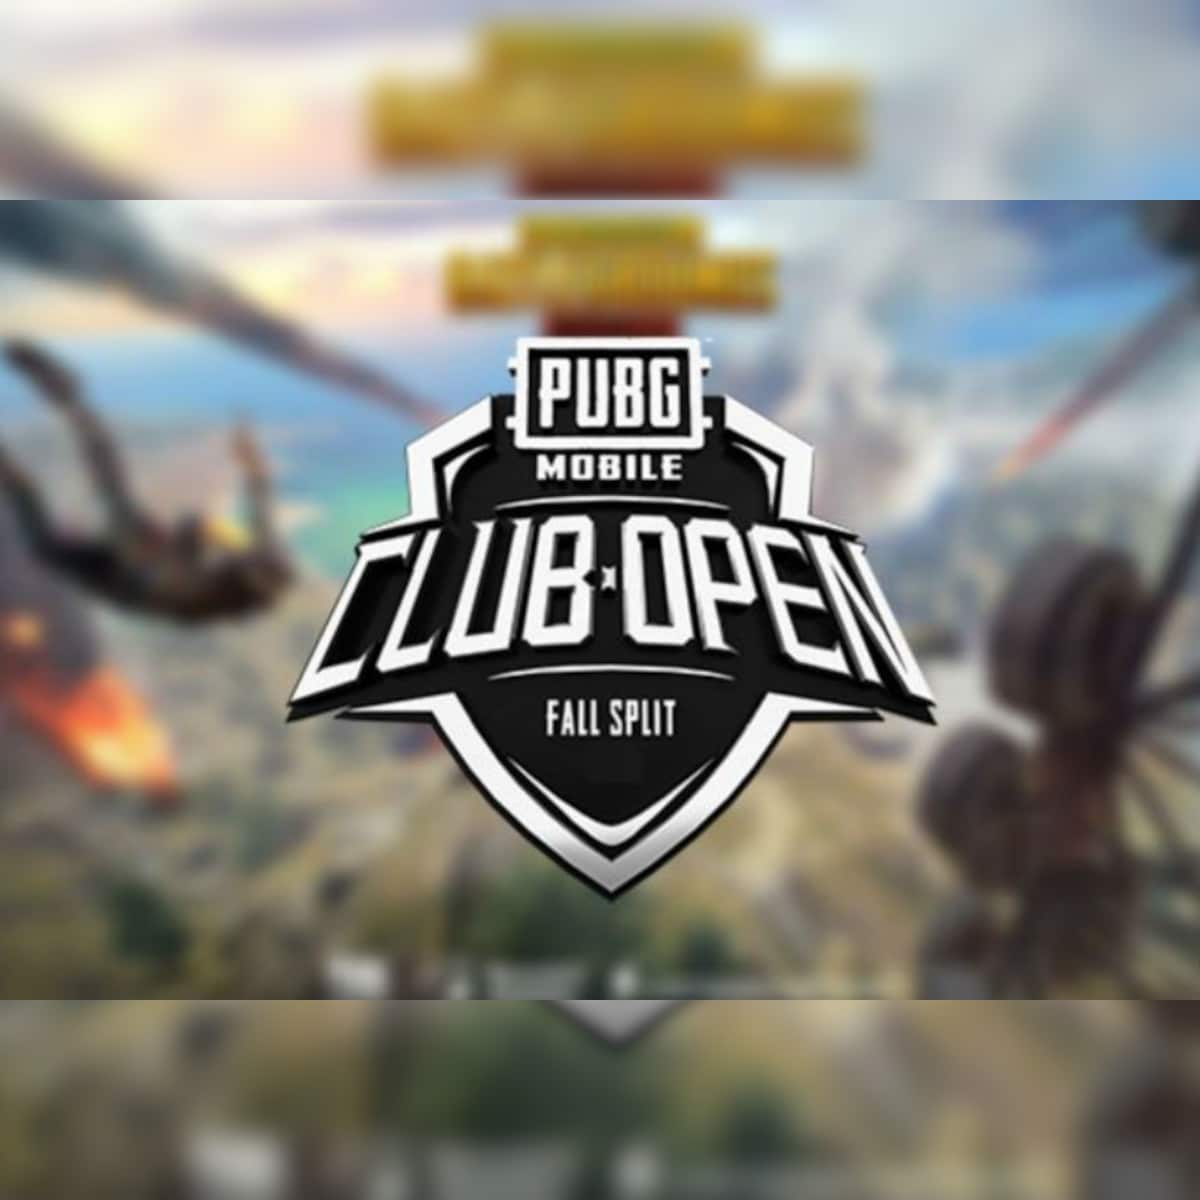 PUBG Mobile Club Open Fall Split 2020, PMPL, PMWL Schedule and Format